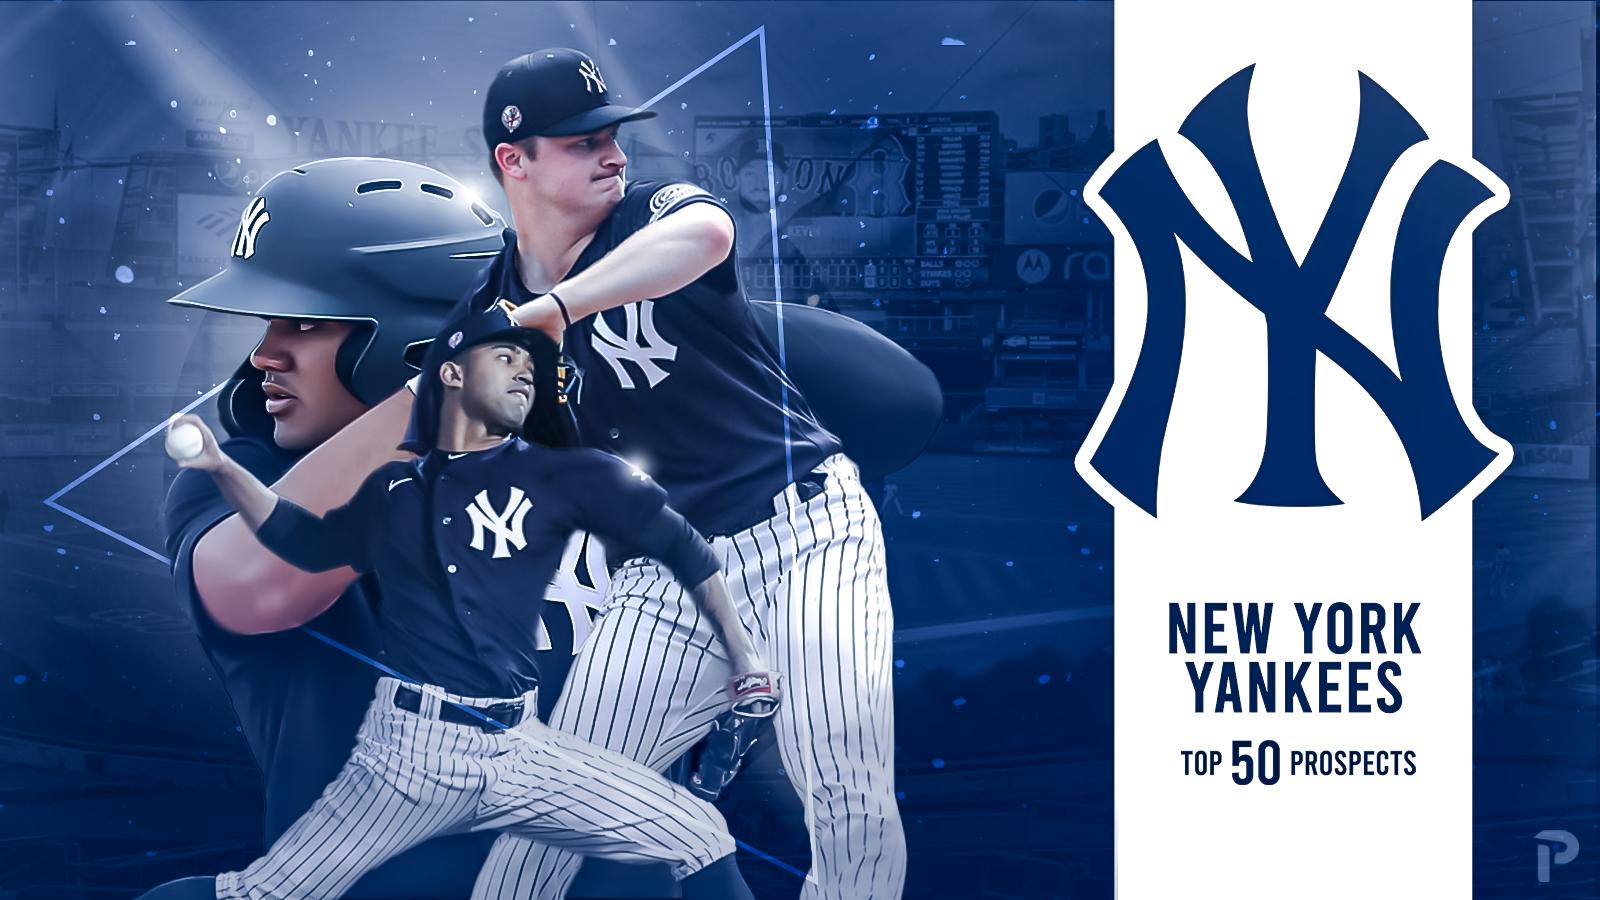 NYYPlayerDev on X: Congratulations to RHP Luis Medina on being selected to  represent the Yankees in the 2021 All-Star Futures Game. The game will be  played on Sunday, July 11th at 3